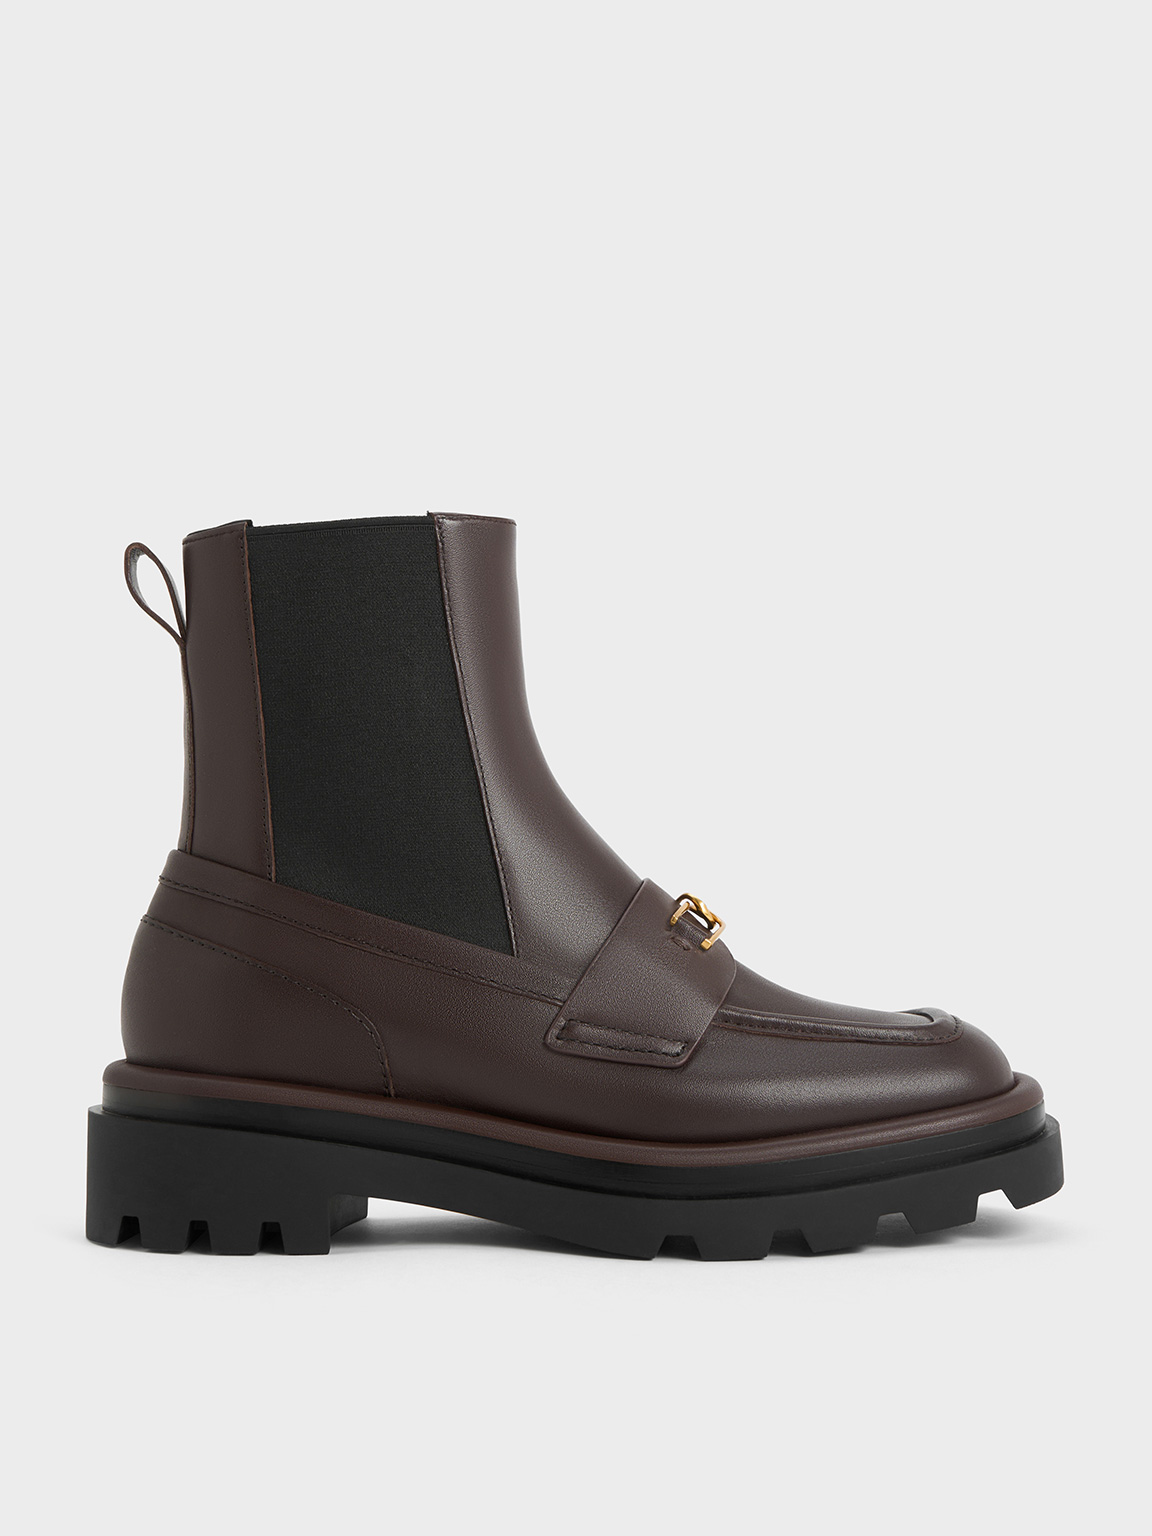 Gabine Leather Loafer Chelsea Boots